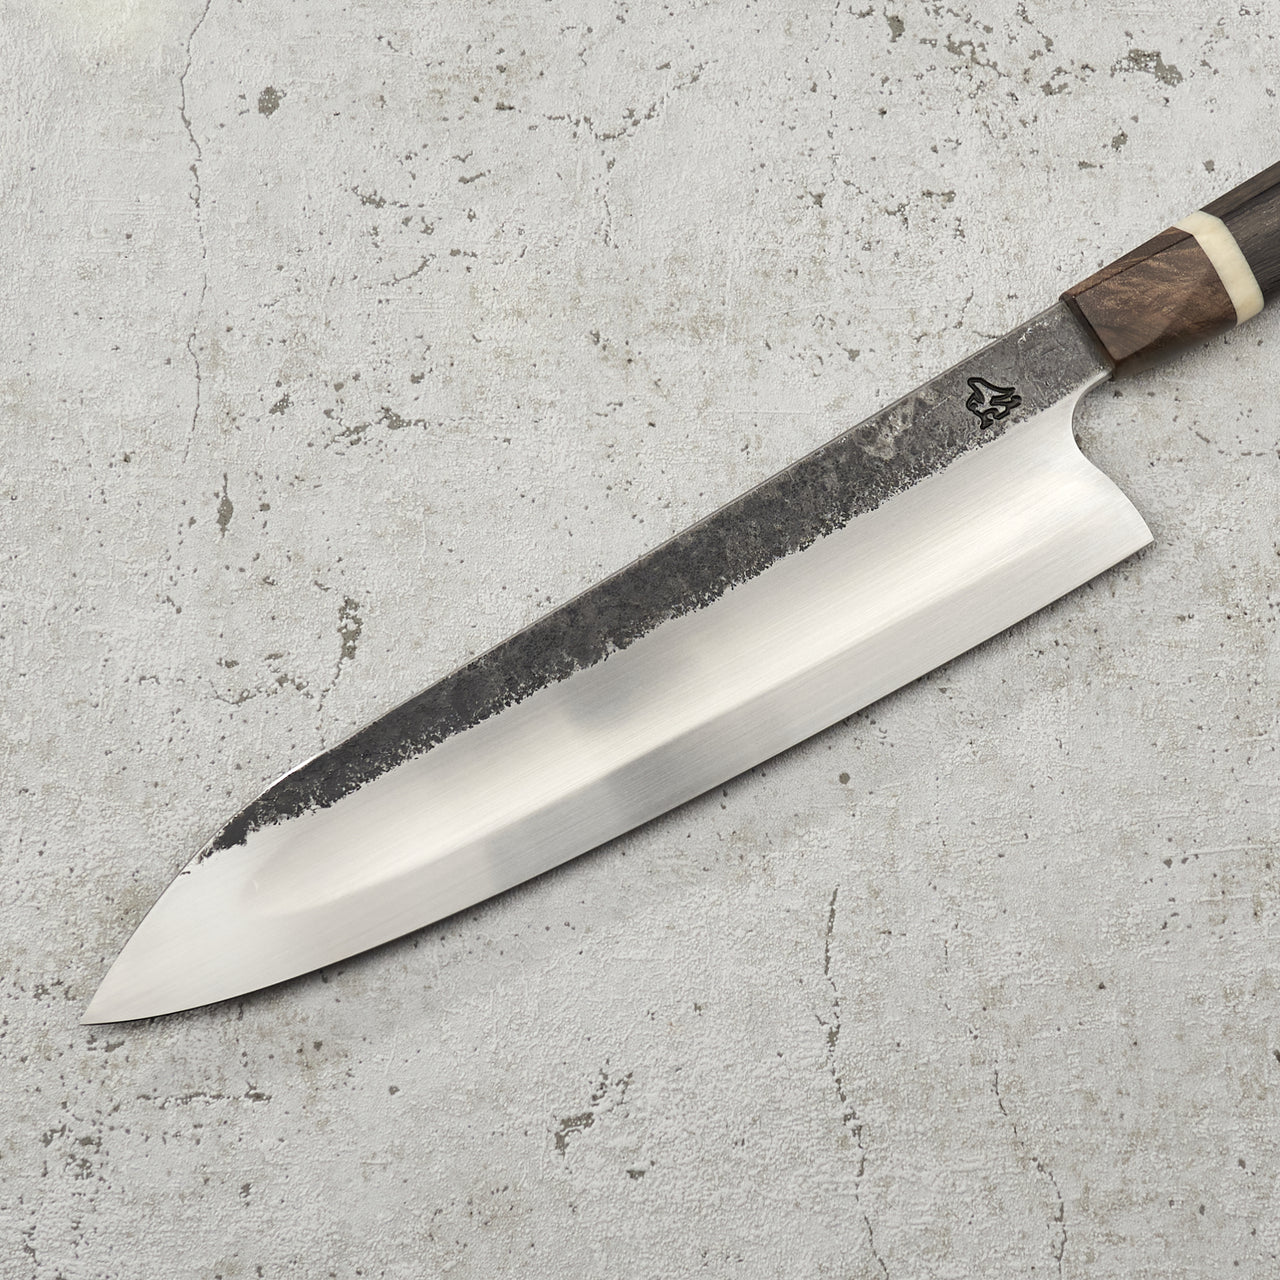 Lew Griffin Gyuto 240mm 52100 Carbon Steel - S Grind - Profile